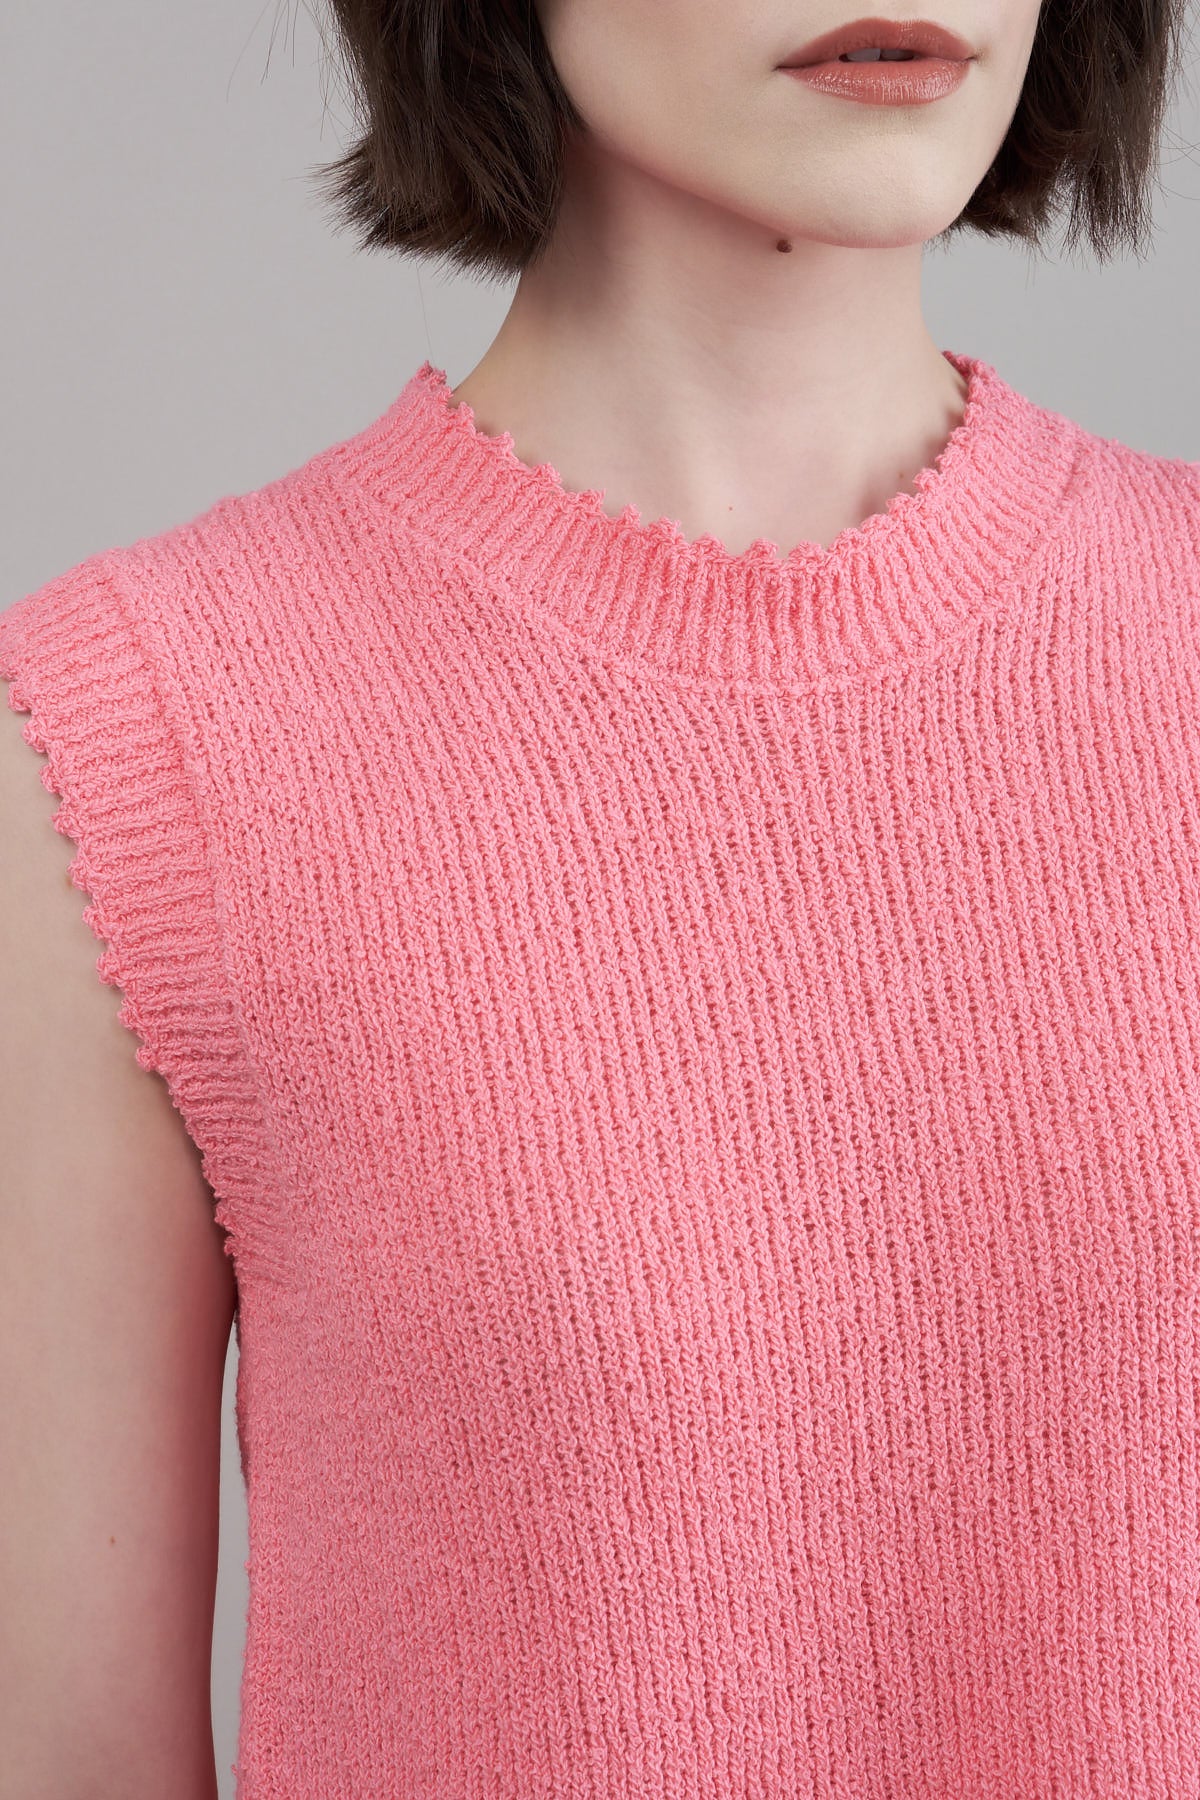 Detailing on Relent Top in Pink